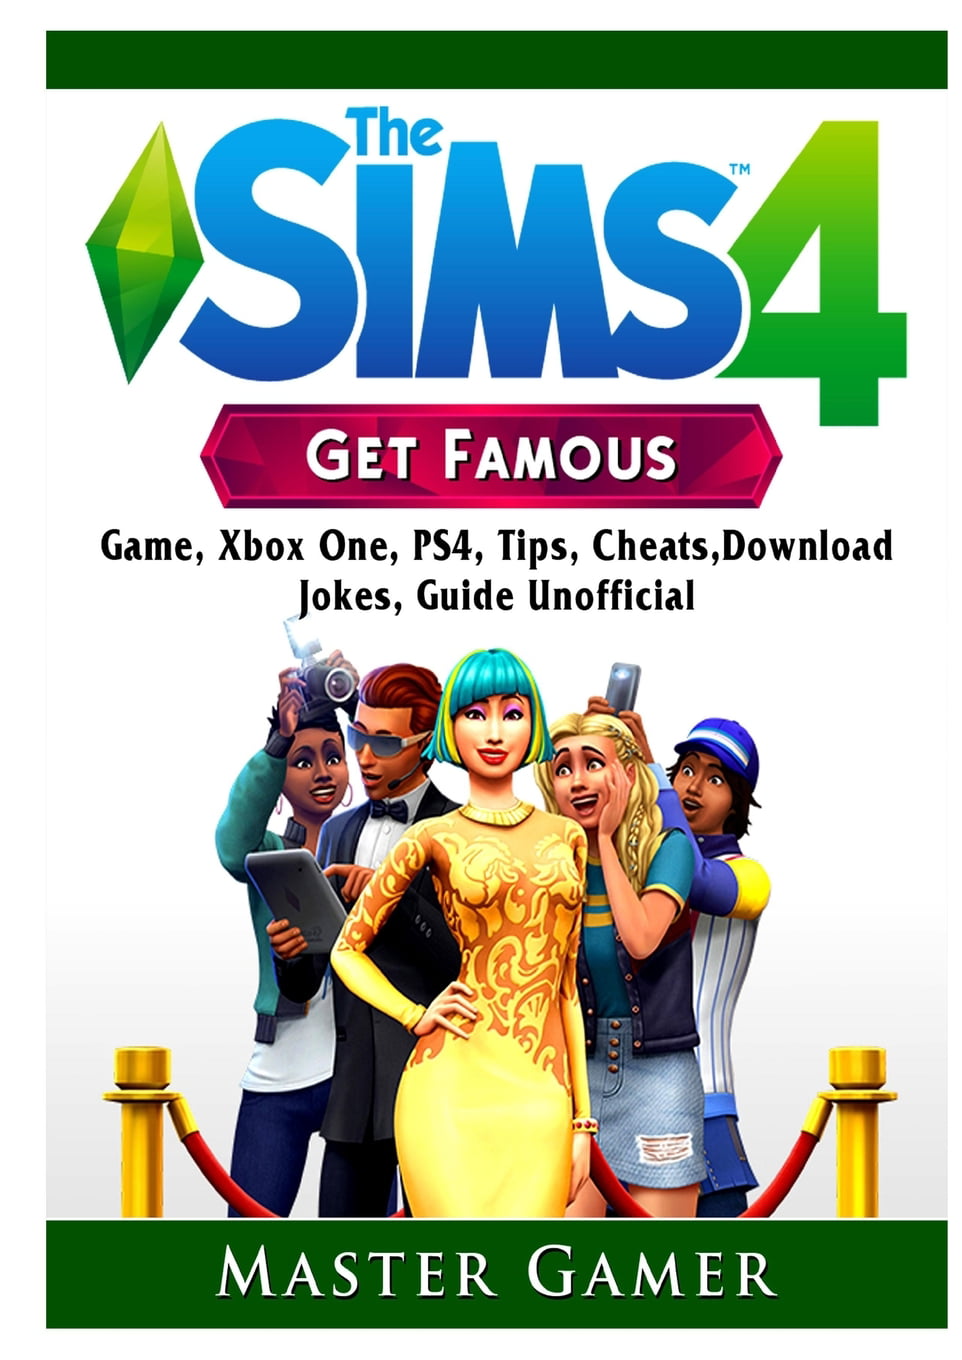 Sims 4 Xbox One and PS4 Money Cheat: How to Get More Cash on